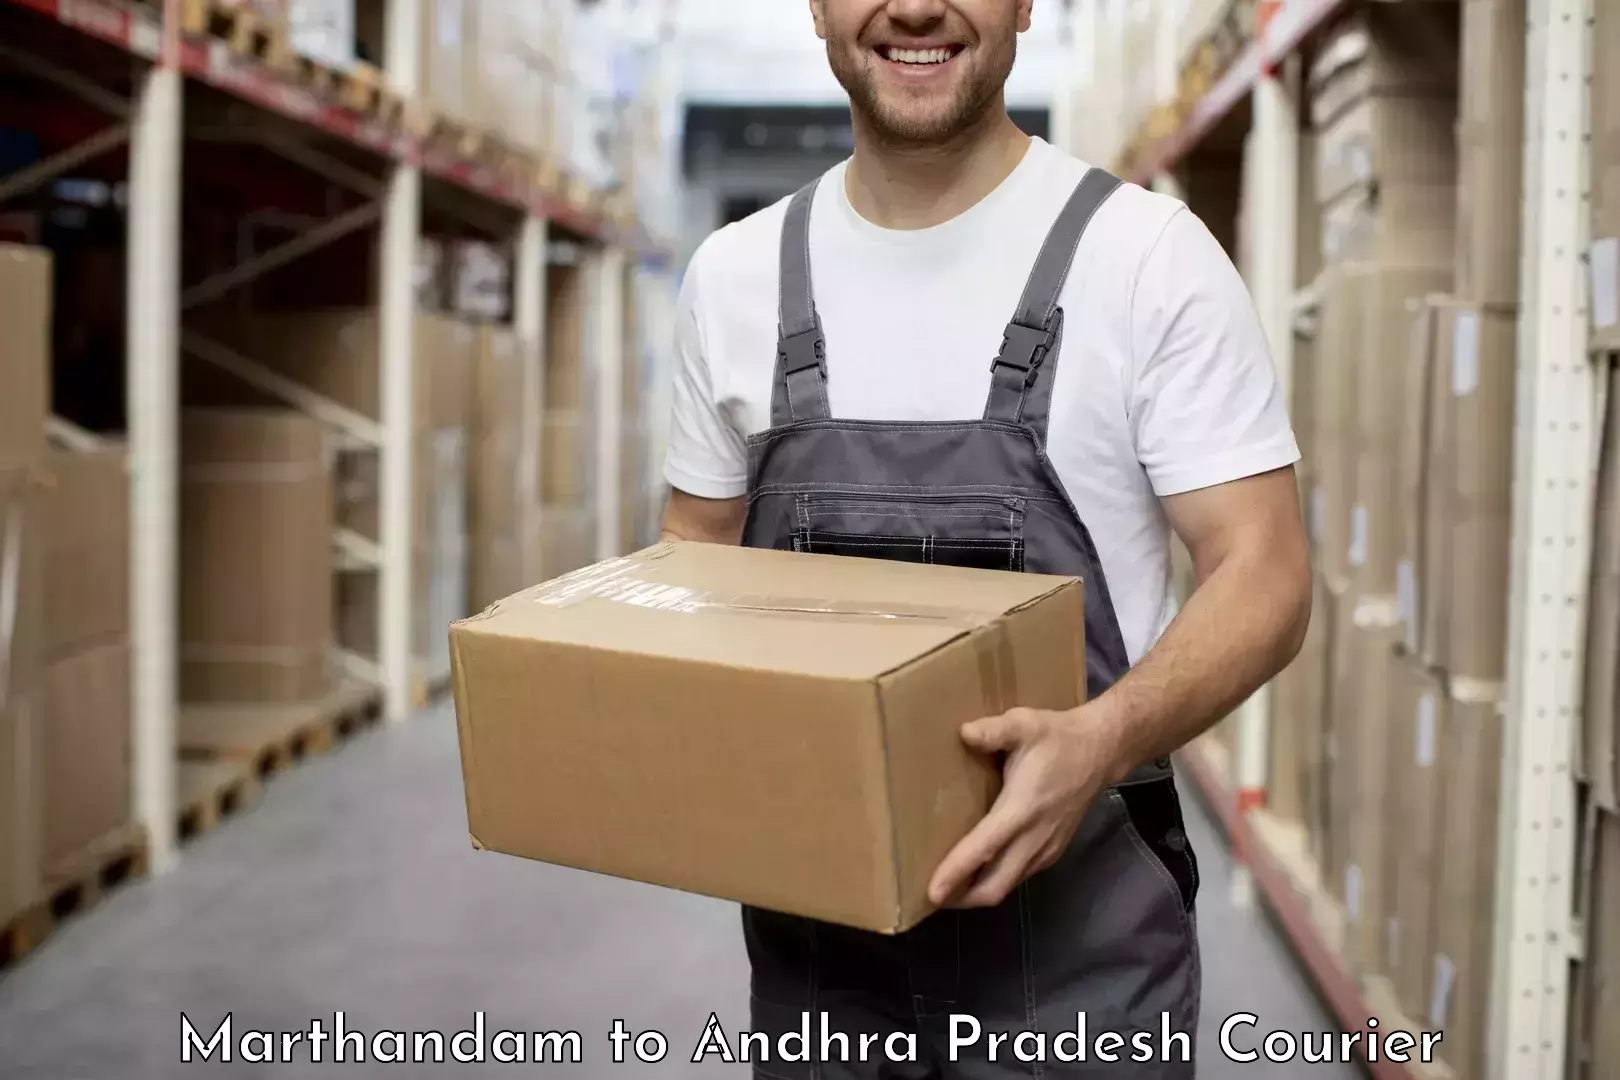 Courier service efficiency Marthandam to Nandyal